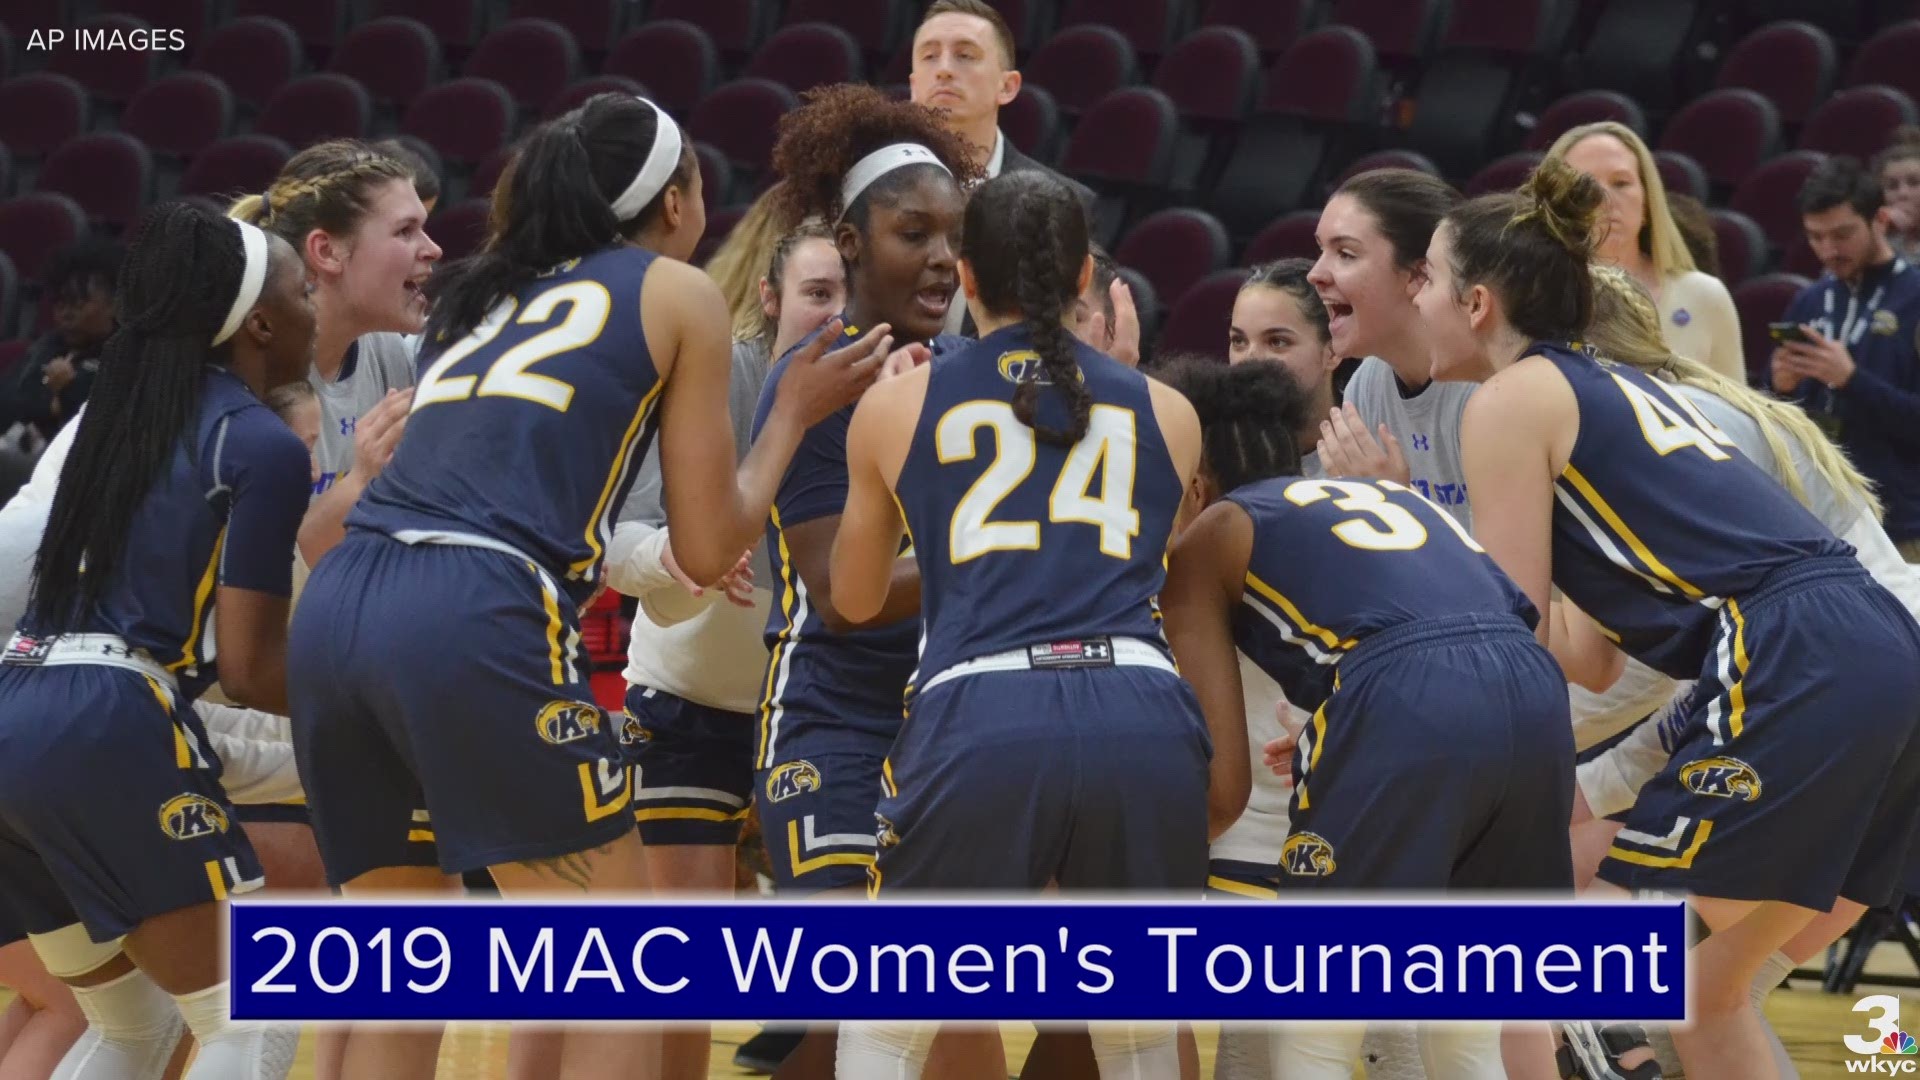 The Kent State Golden Flashes suffered an 85-52 loss to the Buffalo Bulls in the quarterfinals of the 2019 MAC Women's Tournament.